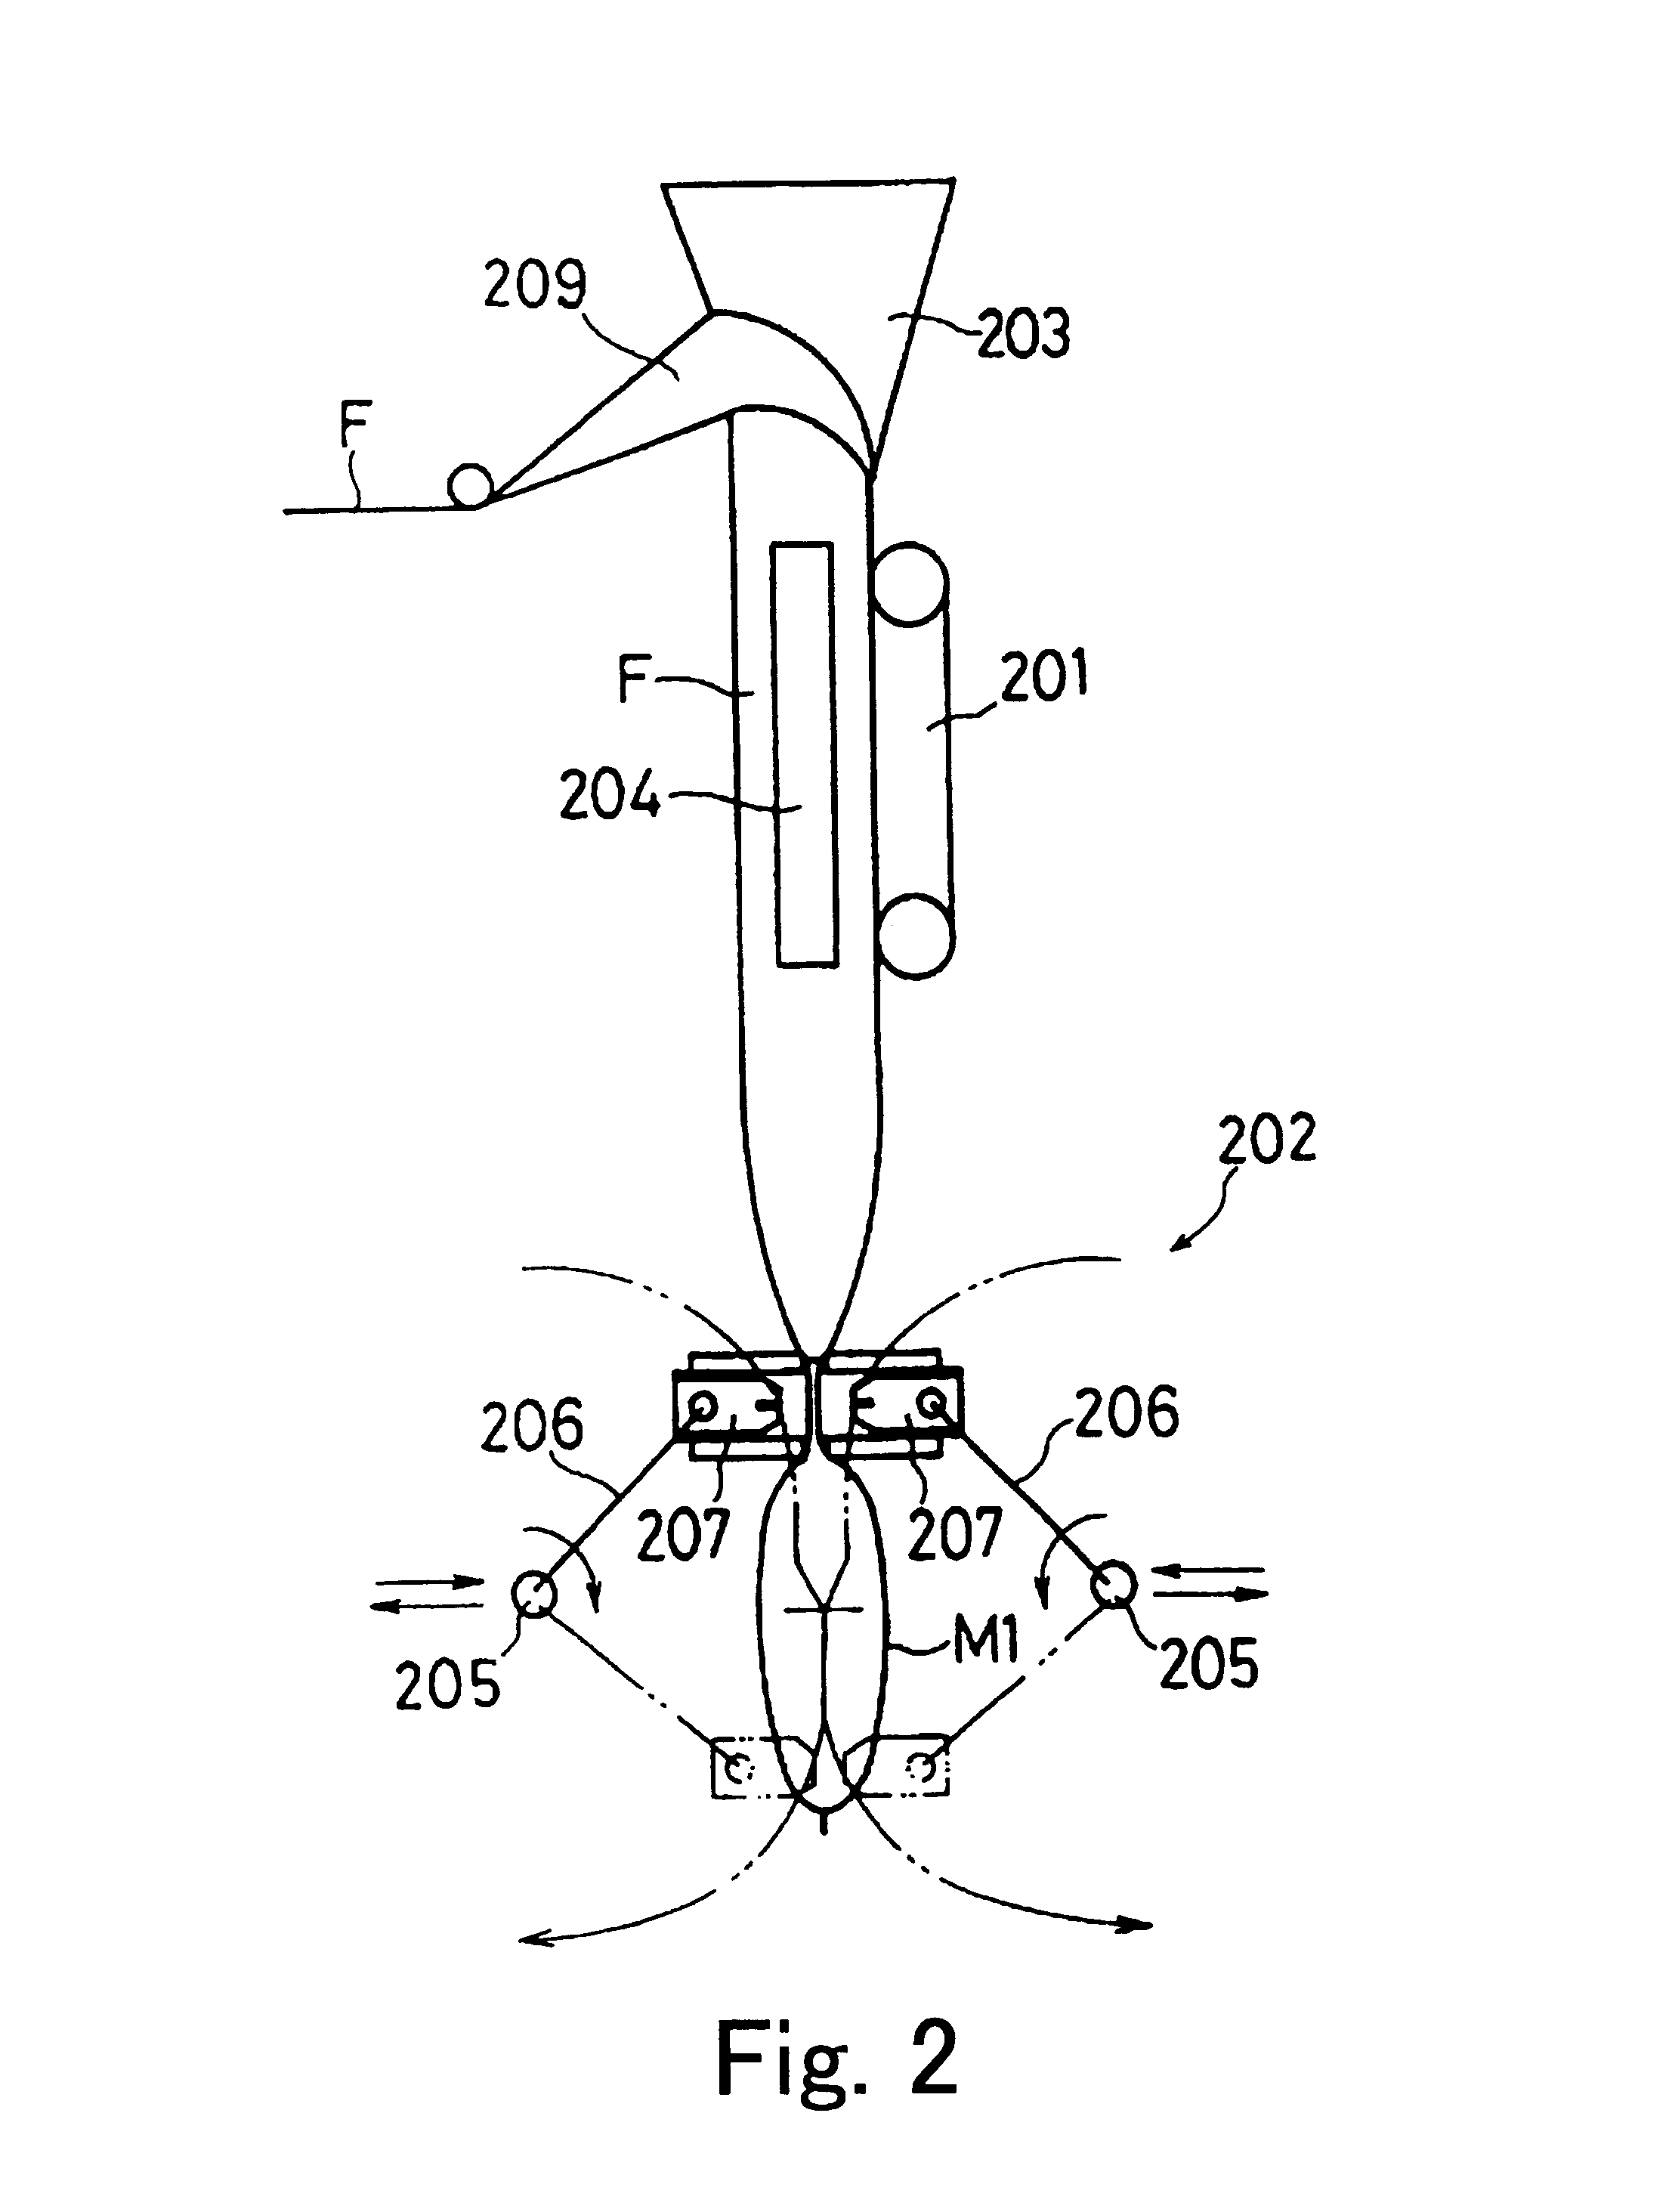 Automatic package inspecting system